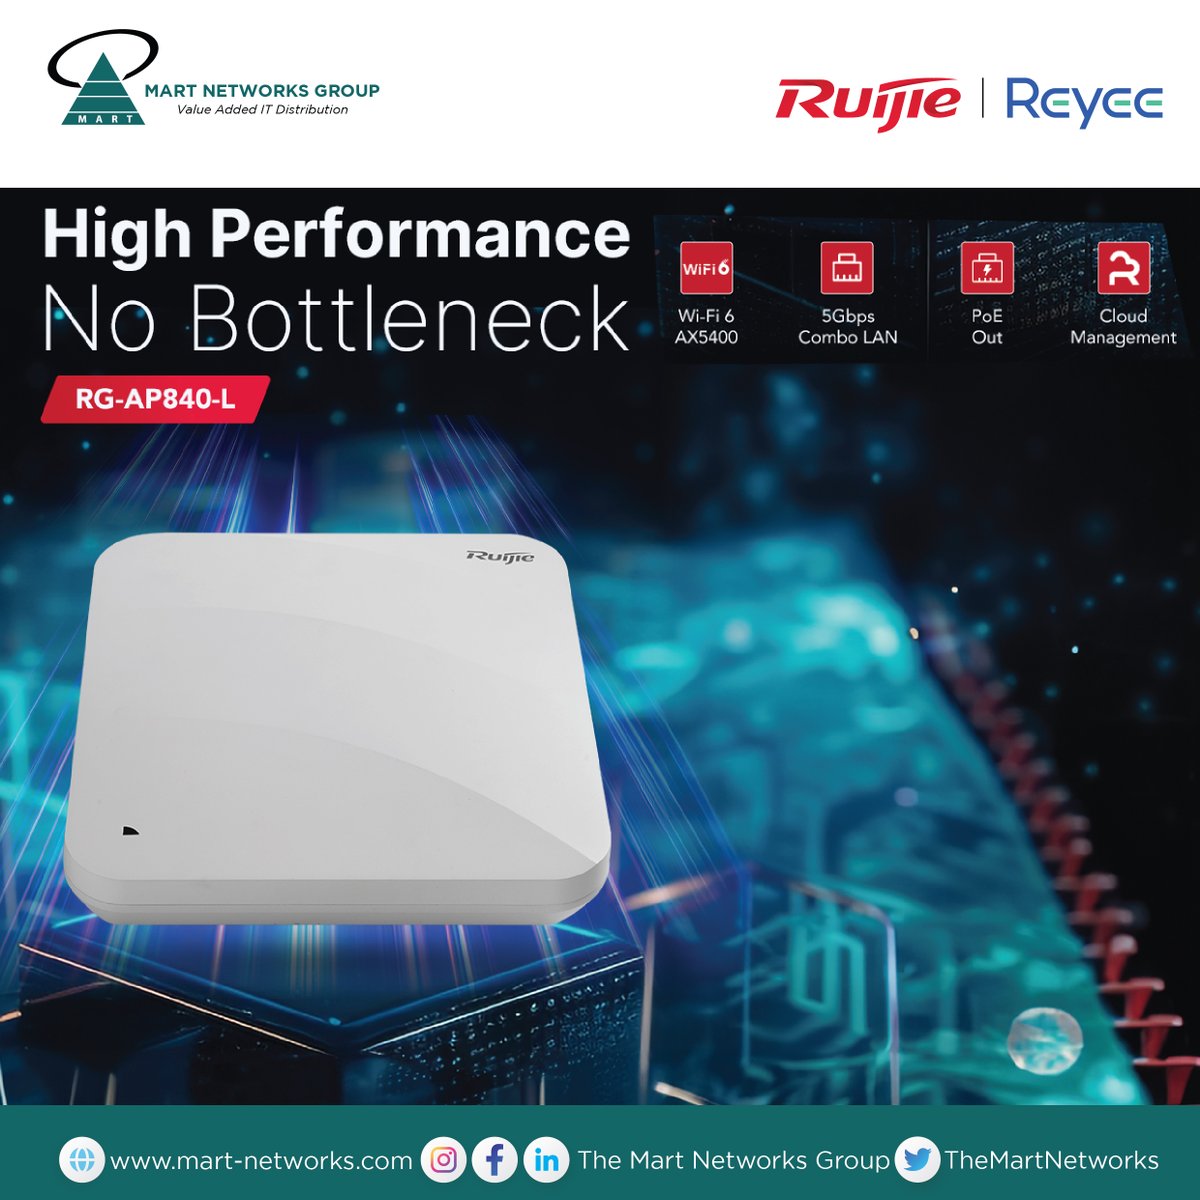 The RG-AP840-L 

Contact Us For More Inquires and Purchase: mart-networks.com/contact-us

Read More: ruijienetworks.com/products/wirel…

#themartnetworksgroup #awardwinningdistributor #youronestopitdistributor #valueaddedservices #RuijieNetworks #EnterpriseWiFi #WirelessNetworking